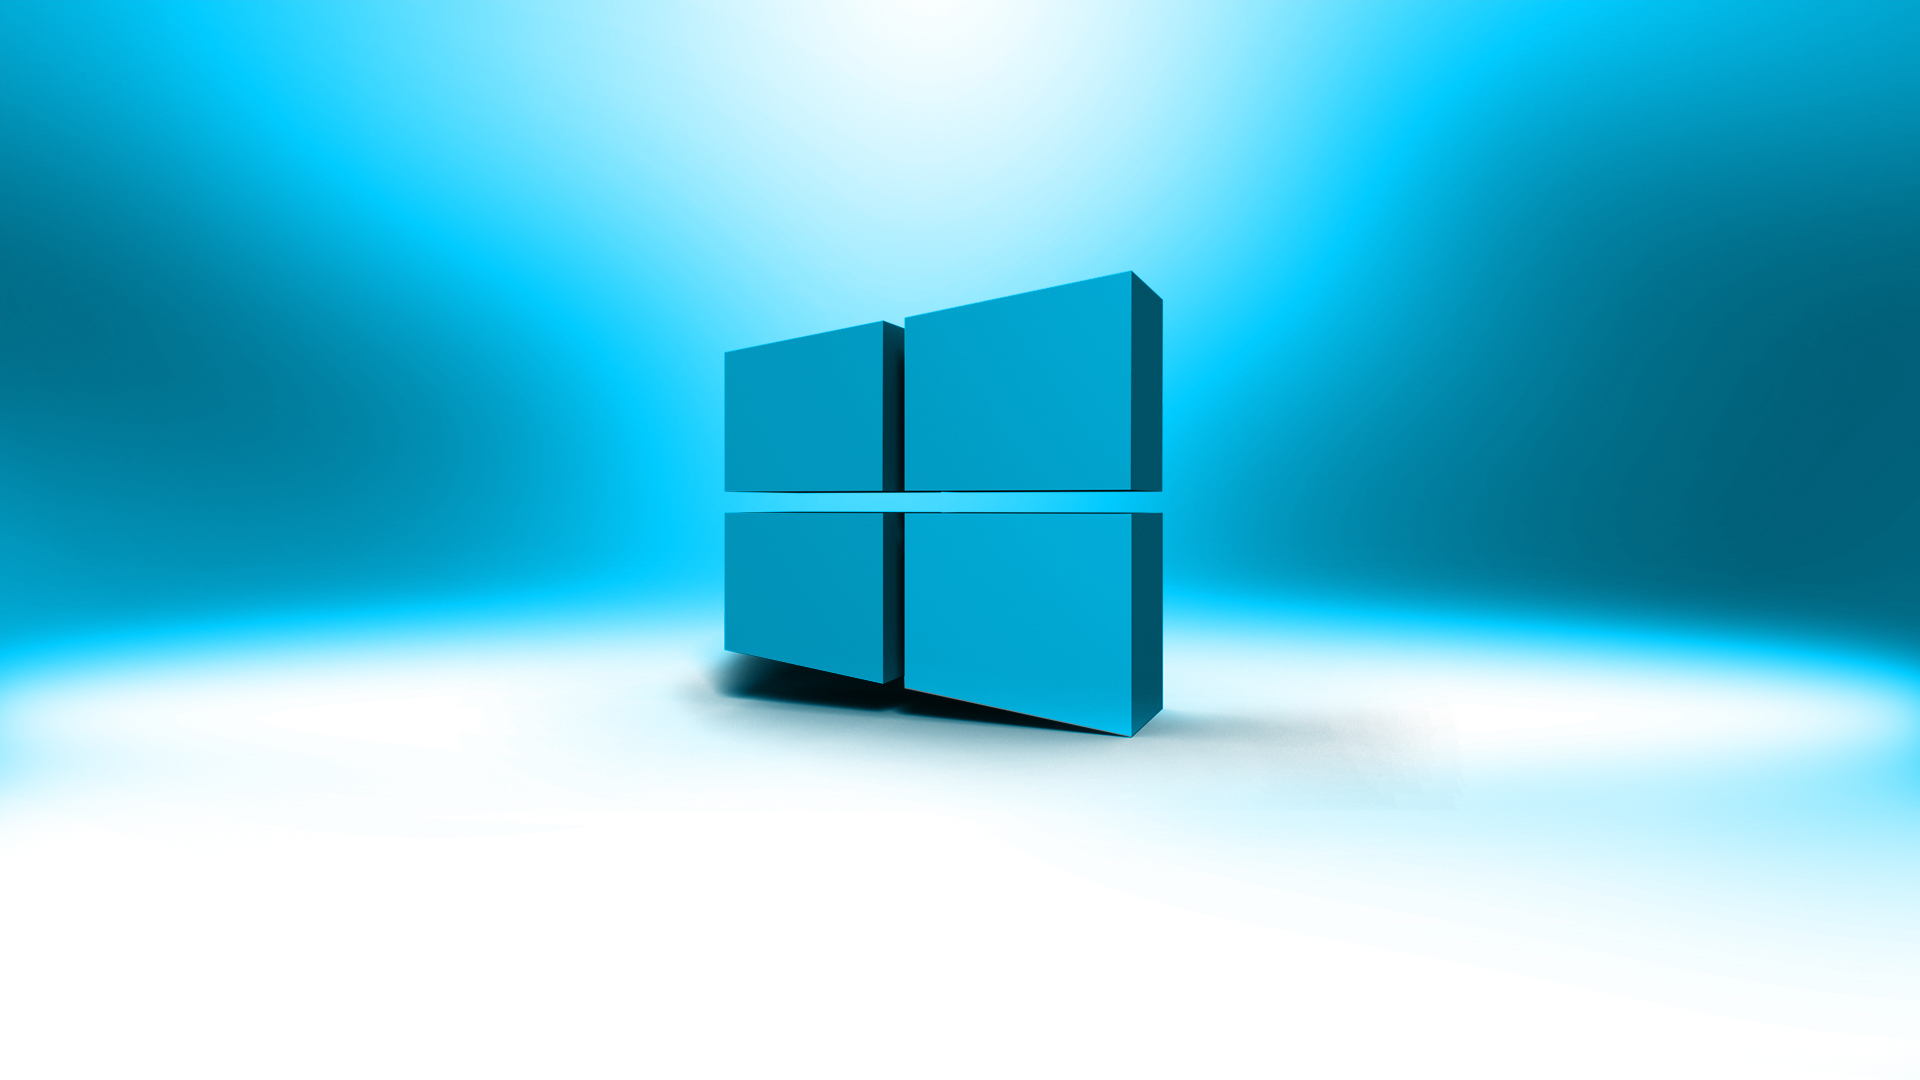 Microsoft windows 3d wallpaper | Wallpapers, Backgrounds, Images ...